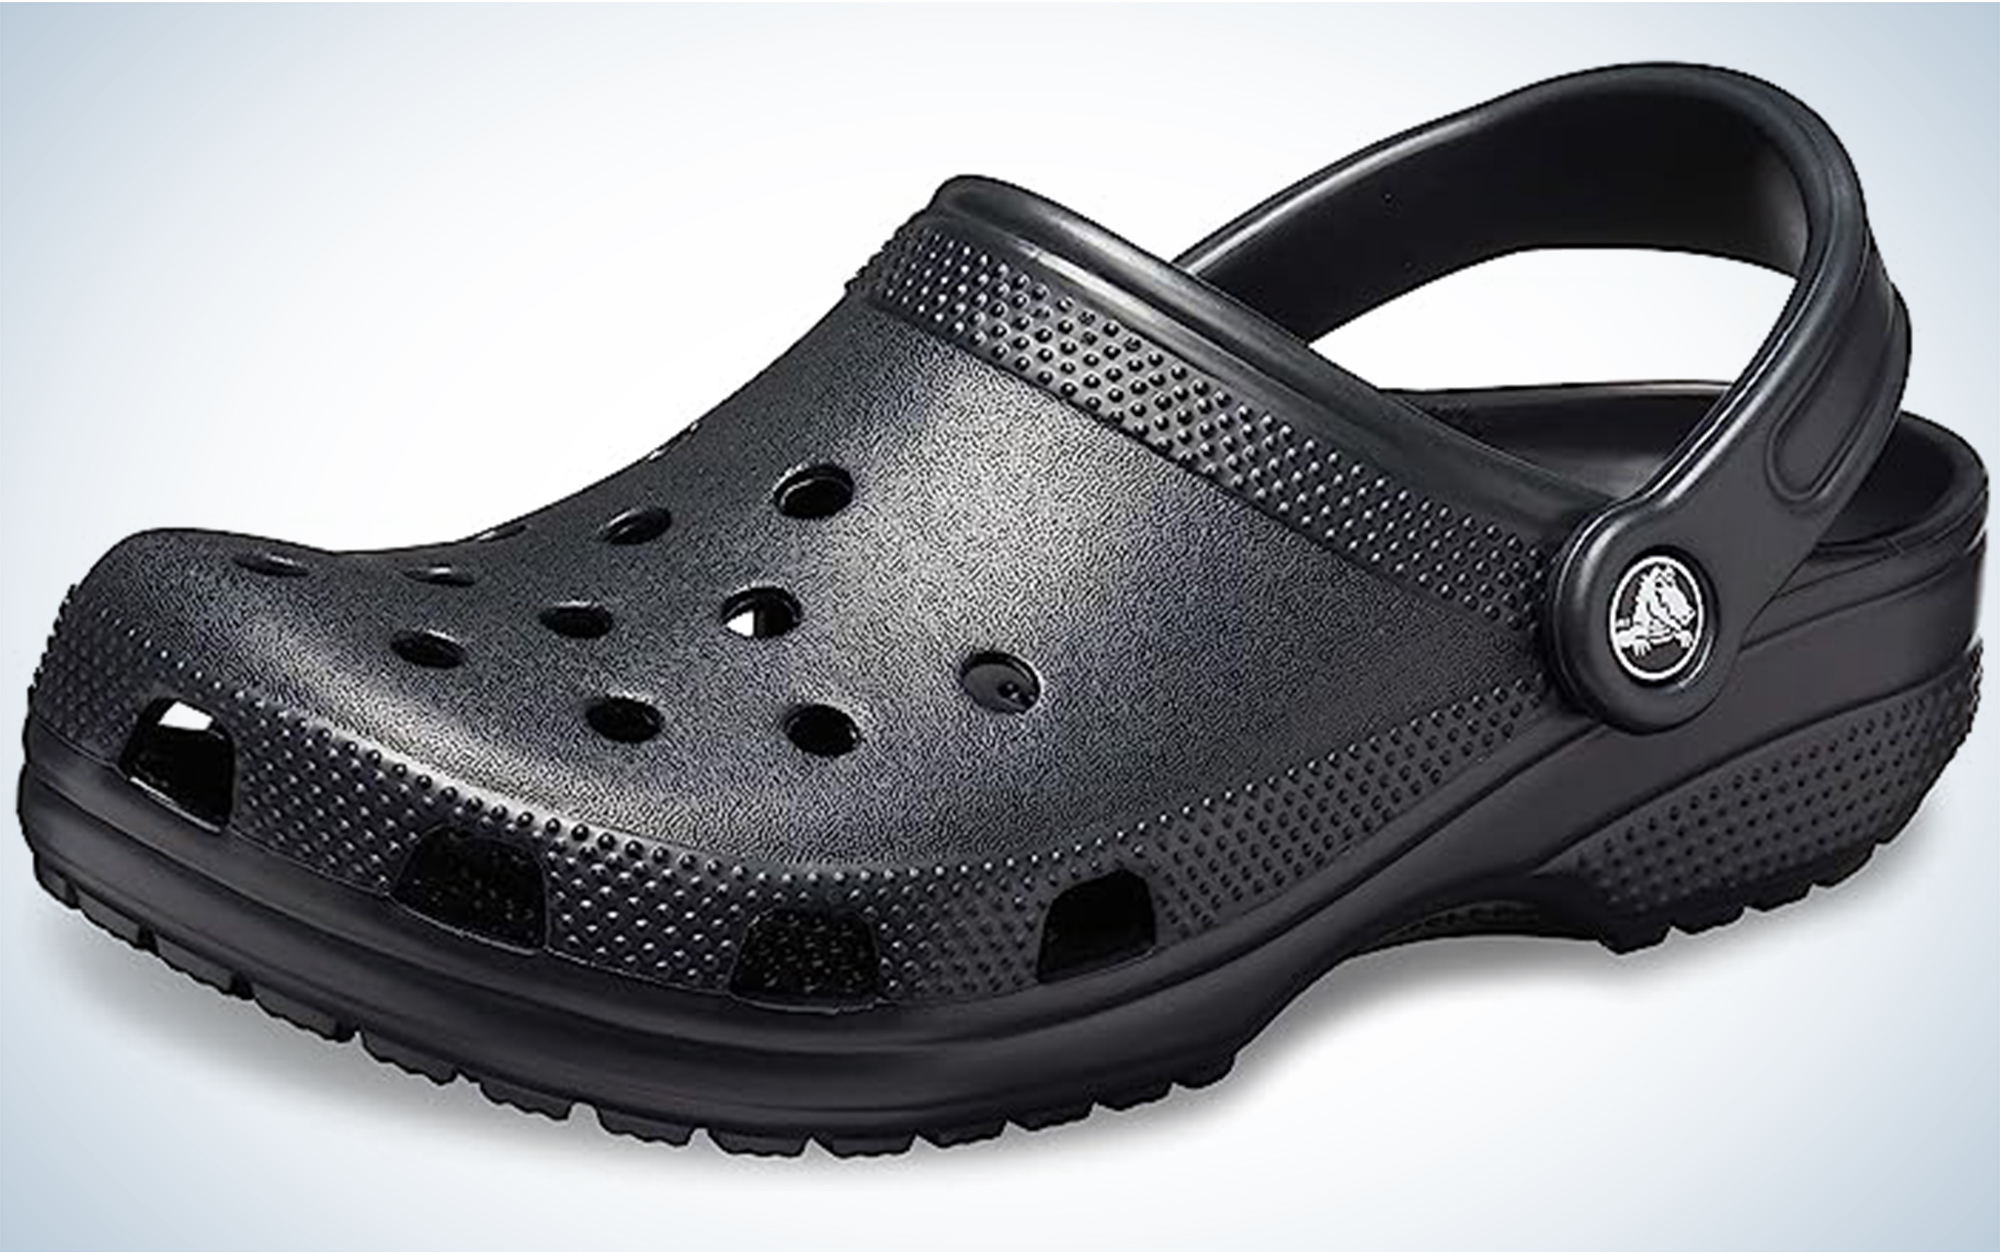 The Crocs Classic Clog is one of the best camp shoes.